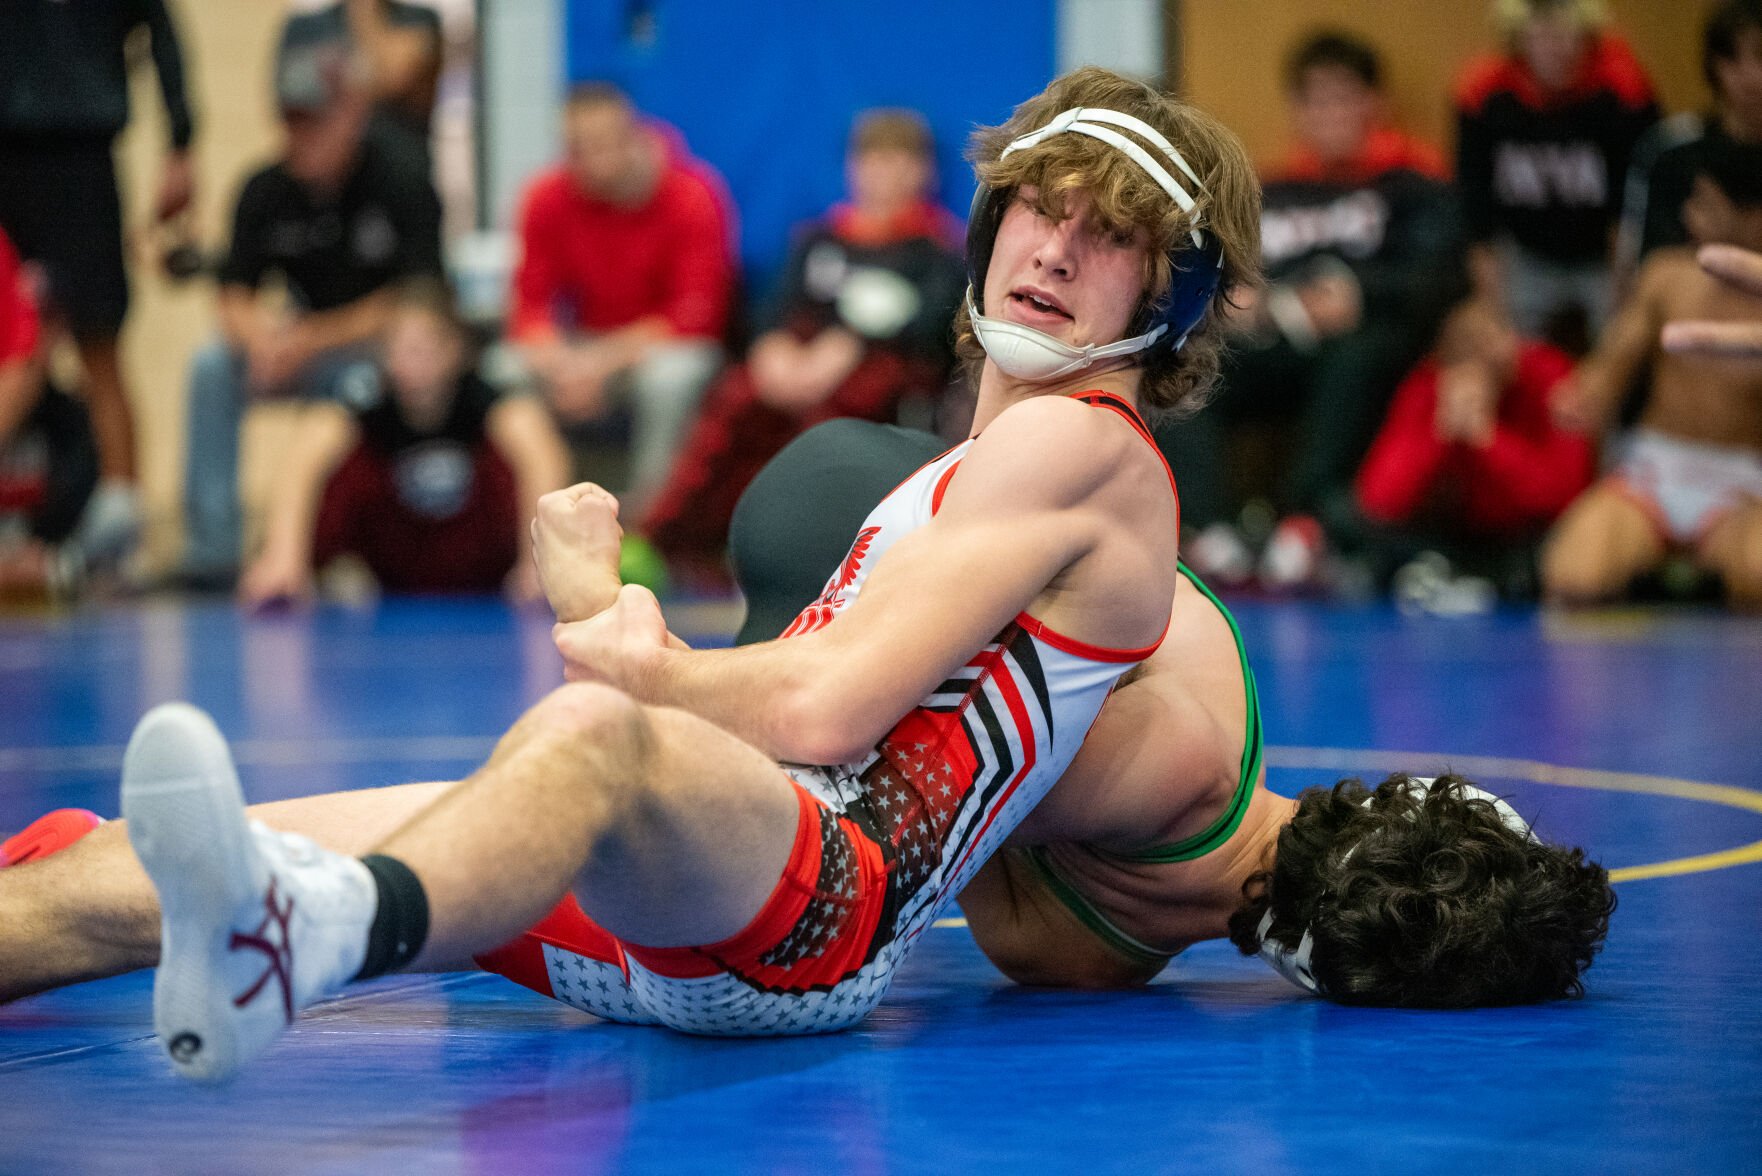 Niagara Wheatfield Wrestlers Prepare for State Tournament and New Quest for Duals Title